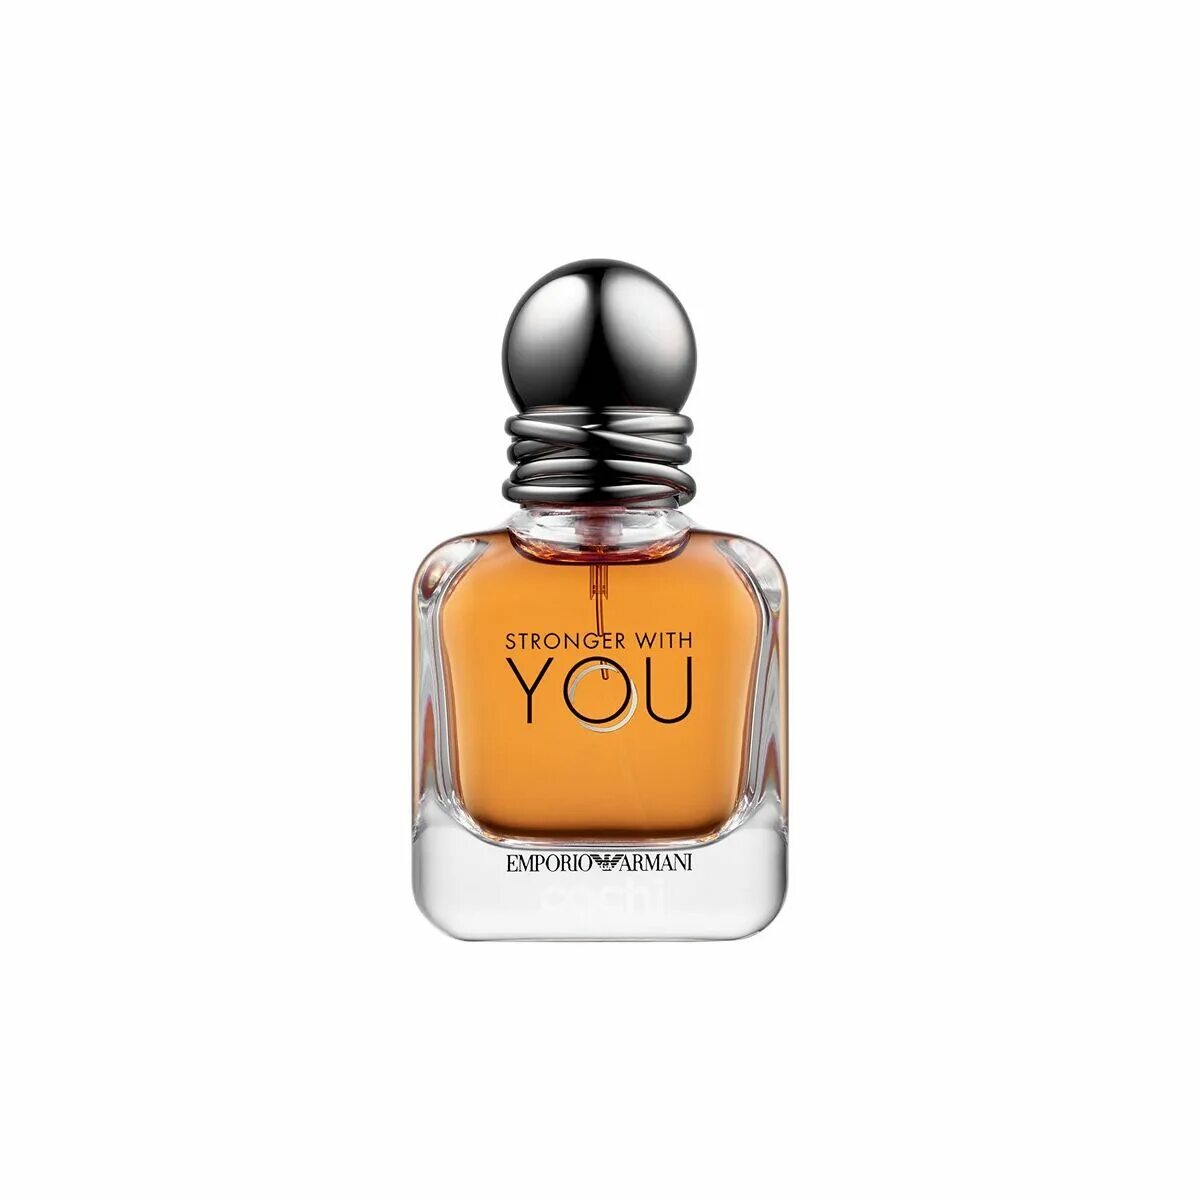 Stronger with you only. Giorgio Armani - stronger with you 15 ml. Giorgio Armani stronger with you only Eau de Toilette. Джорджио Армани стронгер. Armani stronger with you  profumo.